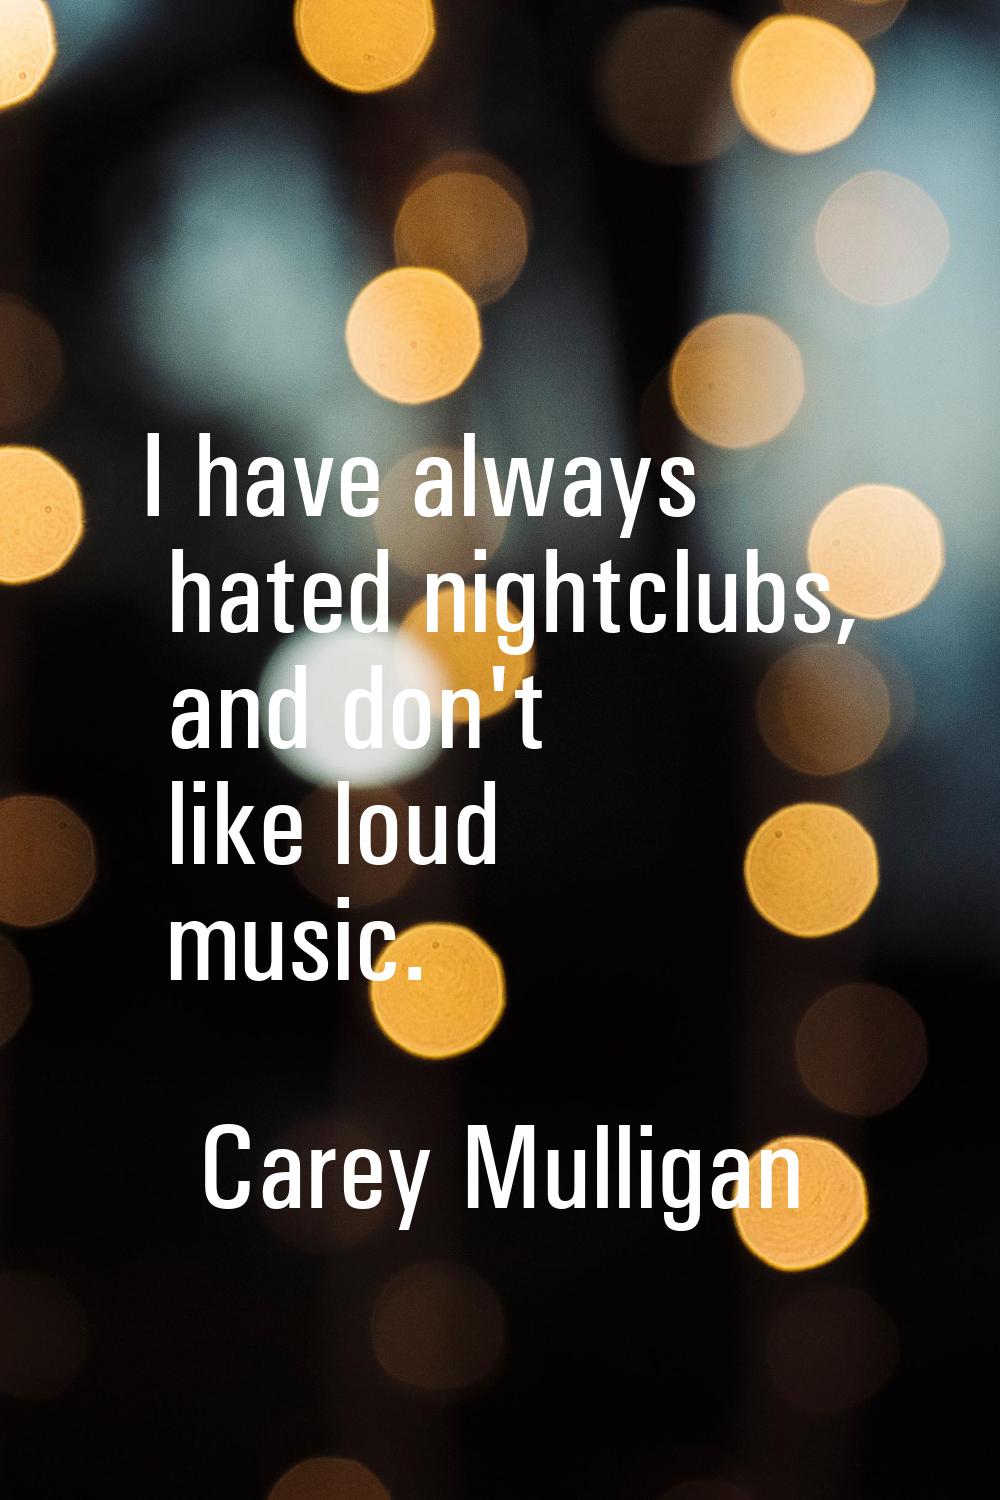 I have always hated nightclubs, and don't like loud music.